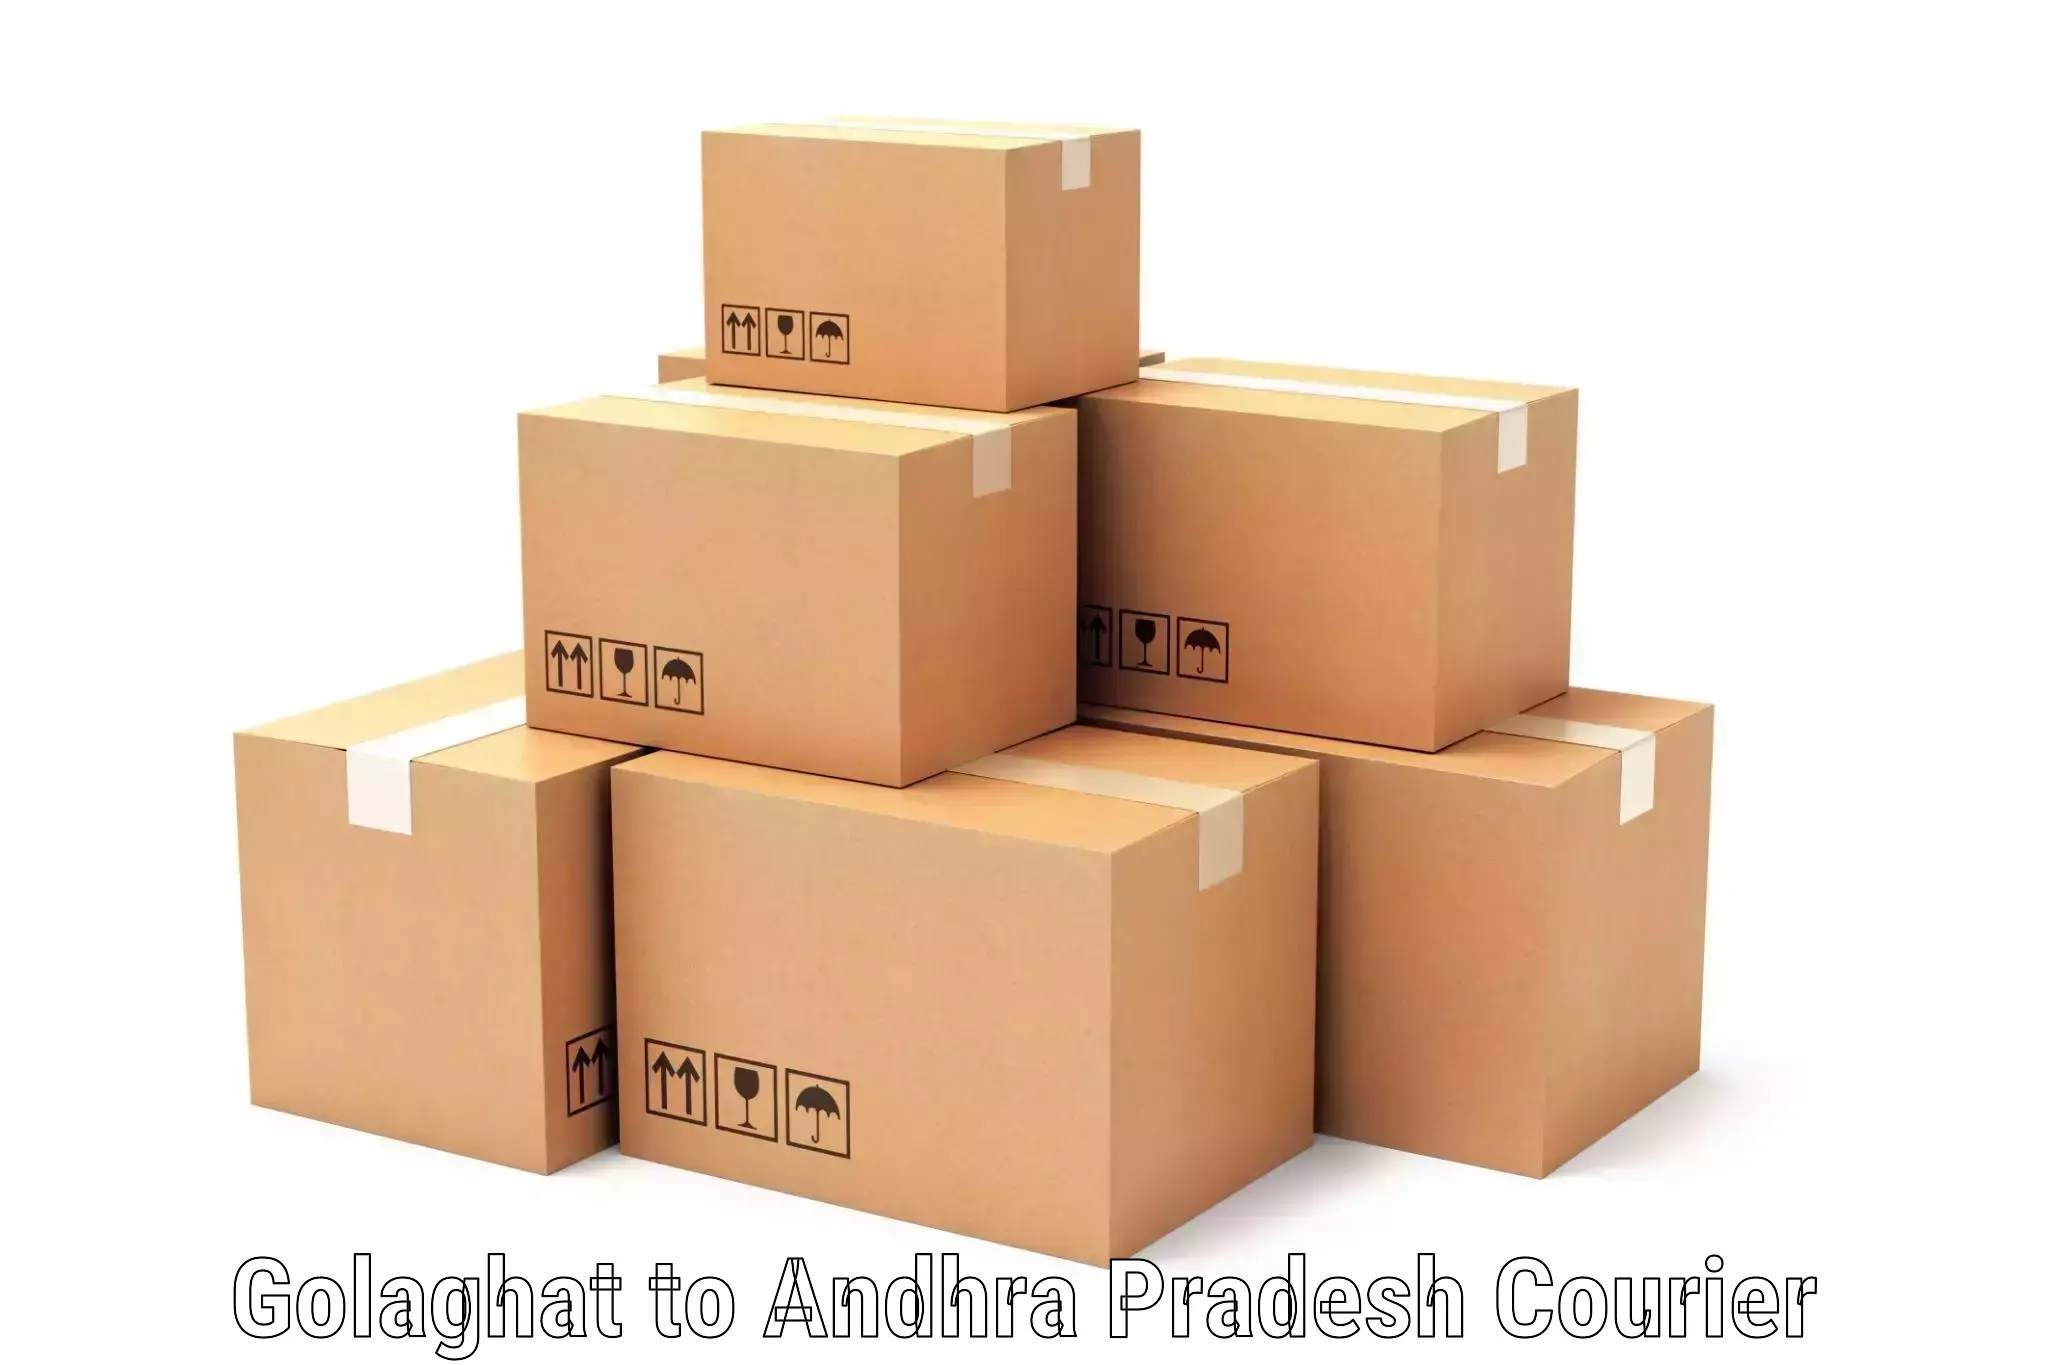 Reliable logistics providers Golaghat to Gudivada